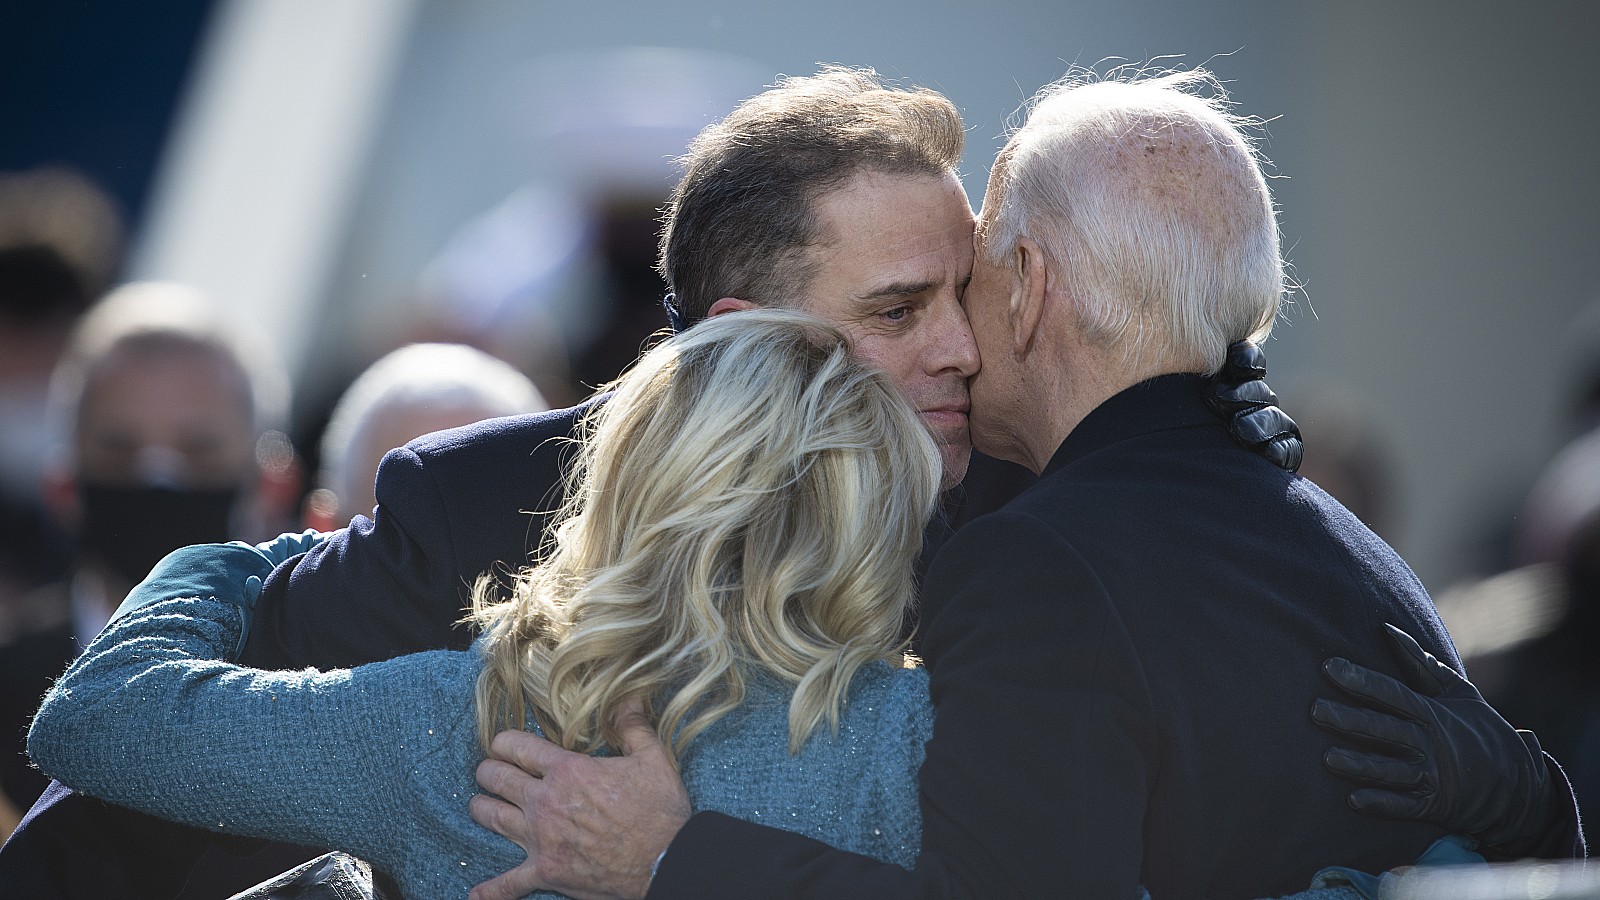 The Biden family embraces at the inauguration